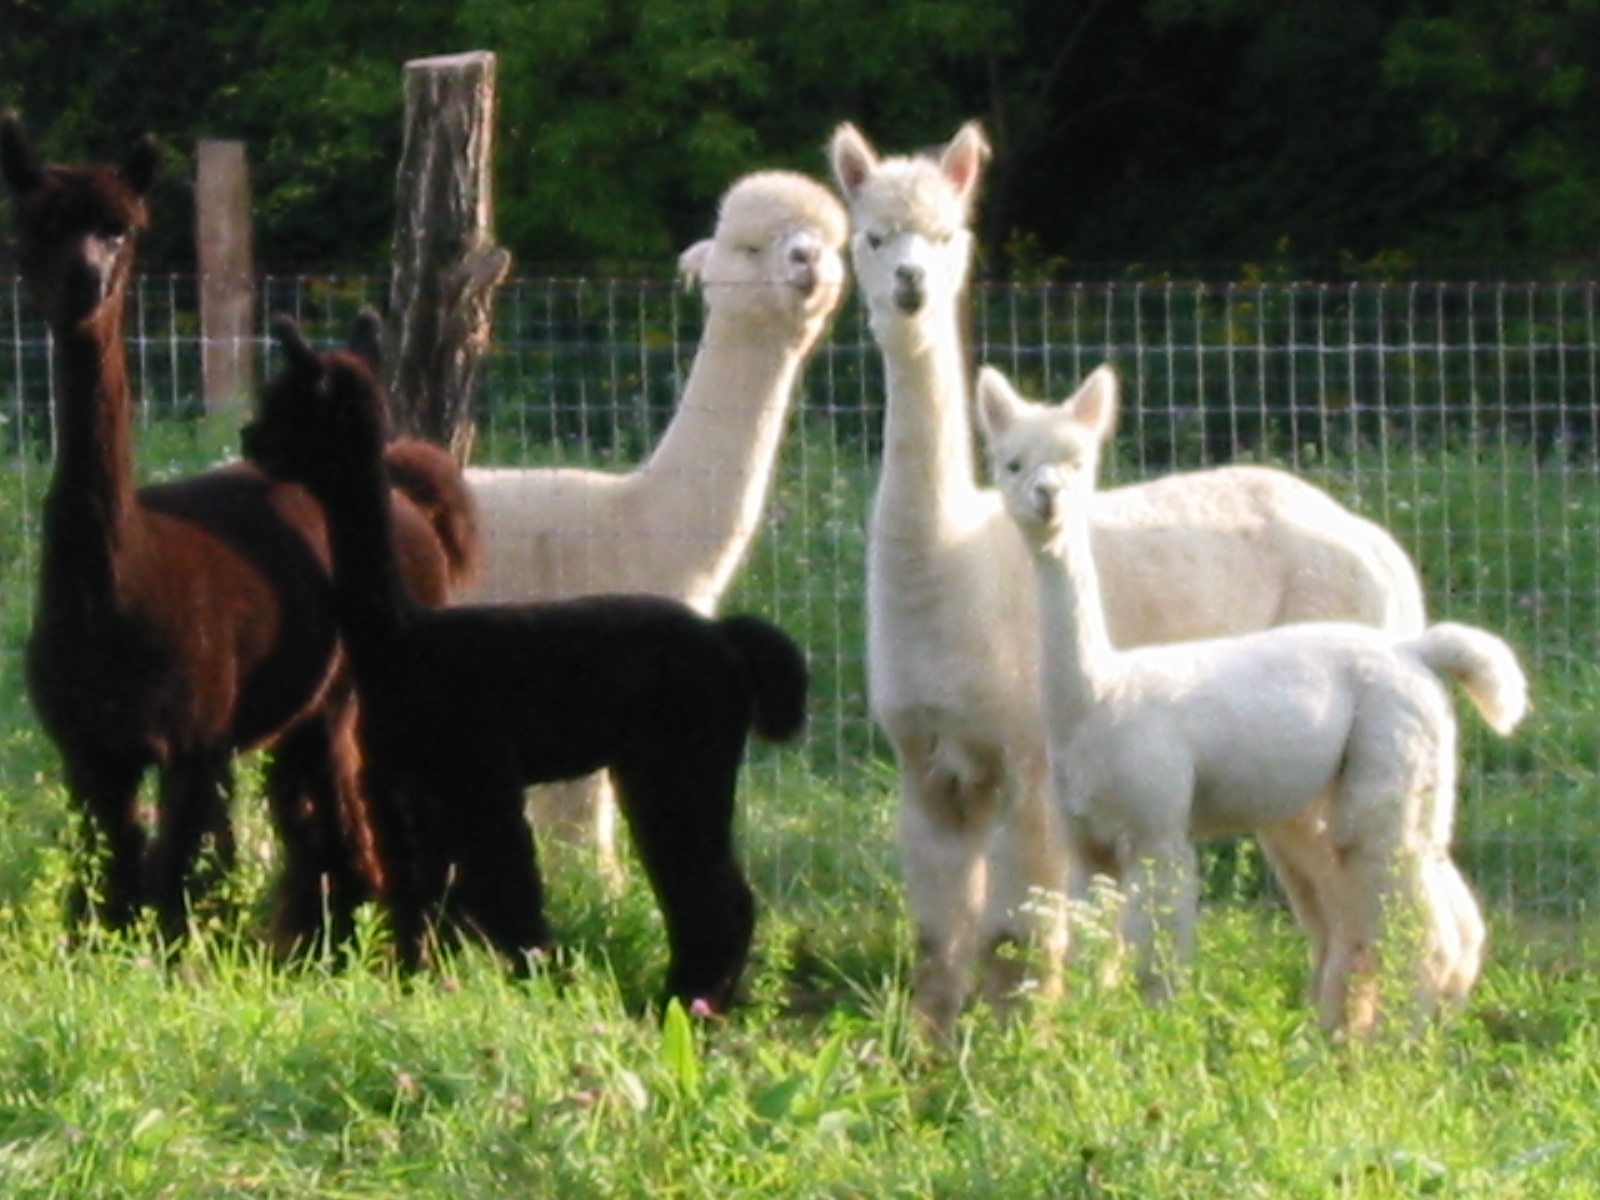 Meet some of our herd